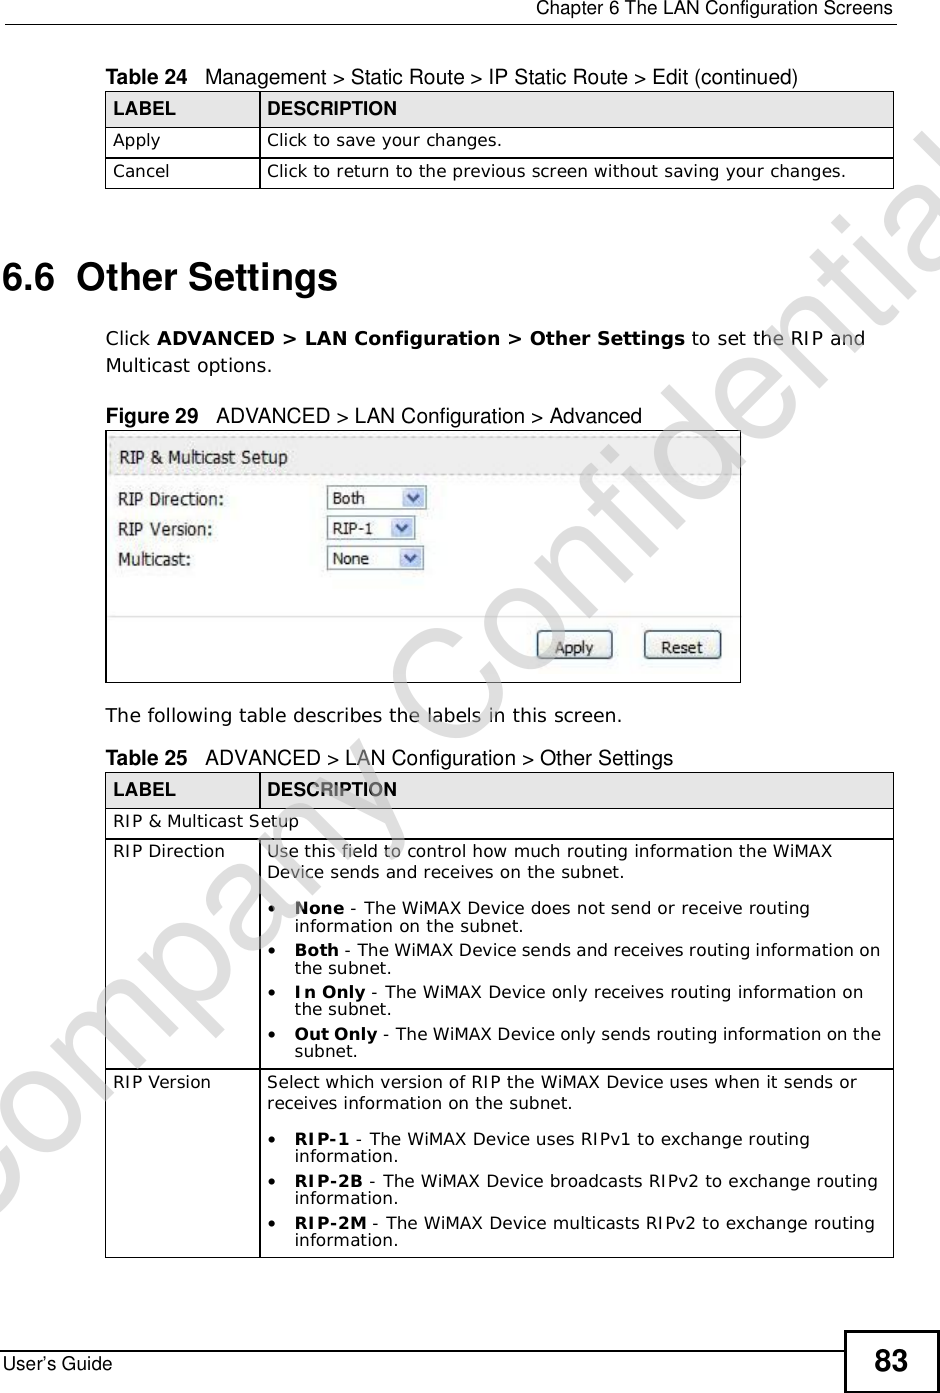  Chapter 6The LAN Configuration ScreensUser’s Guide 836.6  Other SettingsClick ADVANCED &gt; LAN Configuration &gt; Other Settings to set the RIP and Multicast options.Figure 29   ADVANCED &gt; LAN Configuration &gt; AdvancedThe following table describes the labels in this screen.Apply Click to save your changes.Cancel Click to return to the previous screen without saving your changes.Table 24   Management &gt; Static Route &gt; IP Static Route &gt; Edit (continued)LABEL DESCRIPTIONTable 25   ADVANCED &gt; LAN Configuration &gt; Other SettingsLABEL DESCRIPTIONRIP &amp; Multicast SetupRIP Direction Use this field to control how much routing information the WiMAX Device sends and receives on the subnet.•None - The WiMAX Device does not send or receive routing information on the subnet.•Both - The WiMAX Device sends and receives routing information on the subnet.•In Only - The WiMAX Device only receives routing information on the subnet.•Out Only - The WiMAX Device only sends routing information on the subnet.RIP Version Select which version of RIP the WiMAX Device uses when it sends or receives information on the subnet.•RIP-1 - The WiMAX Device uses RIPv1 to exchange routing information.•RIP-2B - The WiMAX Device broadcasts RIPv2 to exchange routing information.•RIP-2M - The WiMAX Device multicasts RIPv2 to exchange routing information.Company Confidential